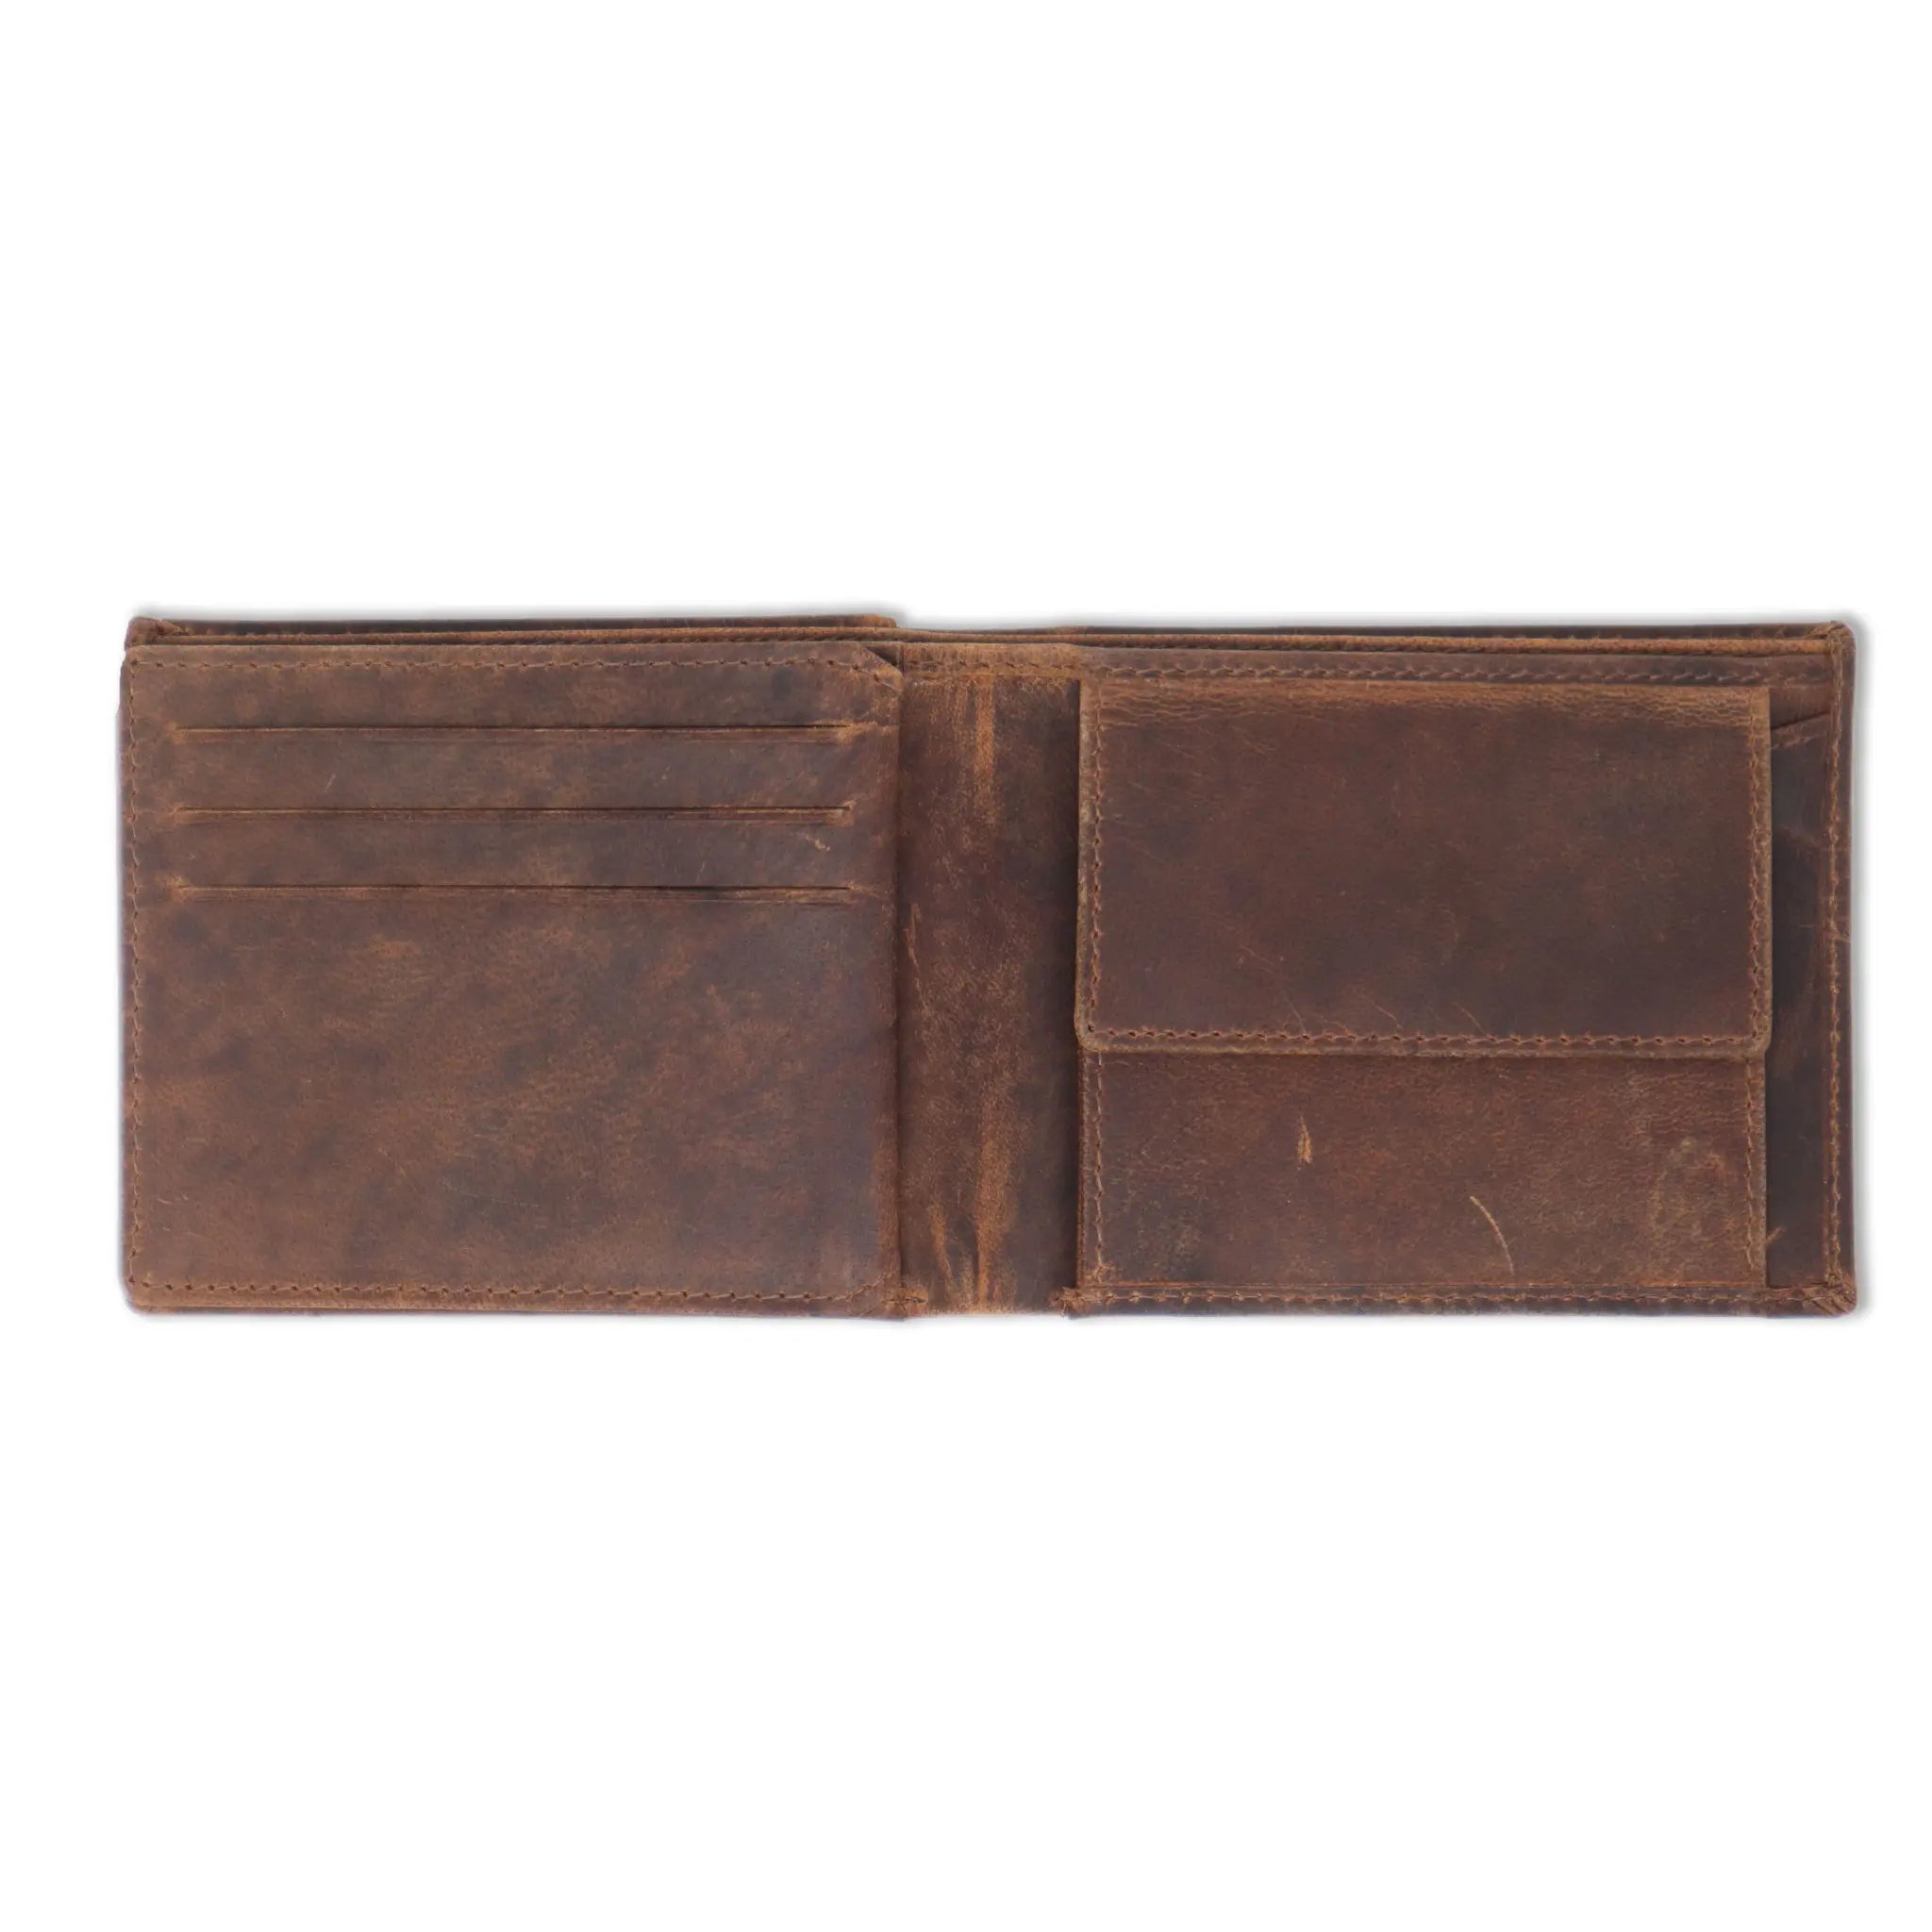 Copper Brown Leather Wallet - Larimars Clothing Men's Formal and casual wear shirts